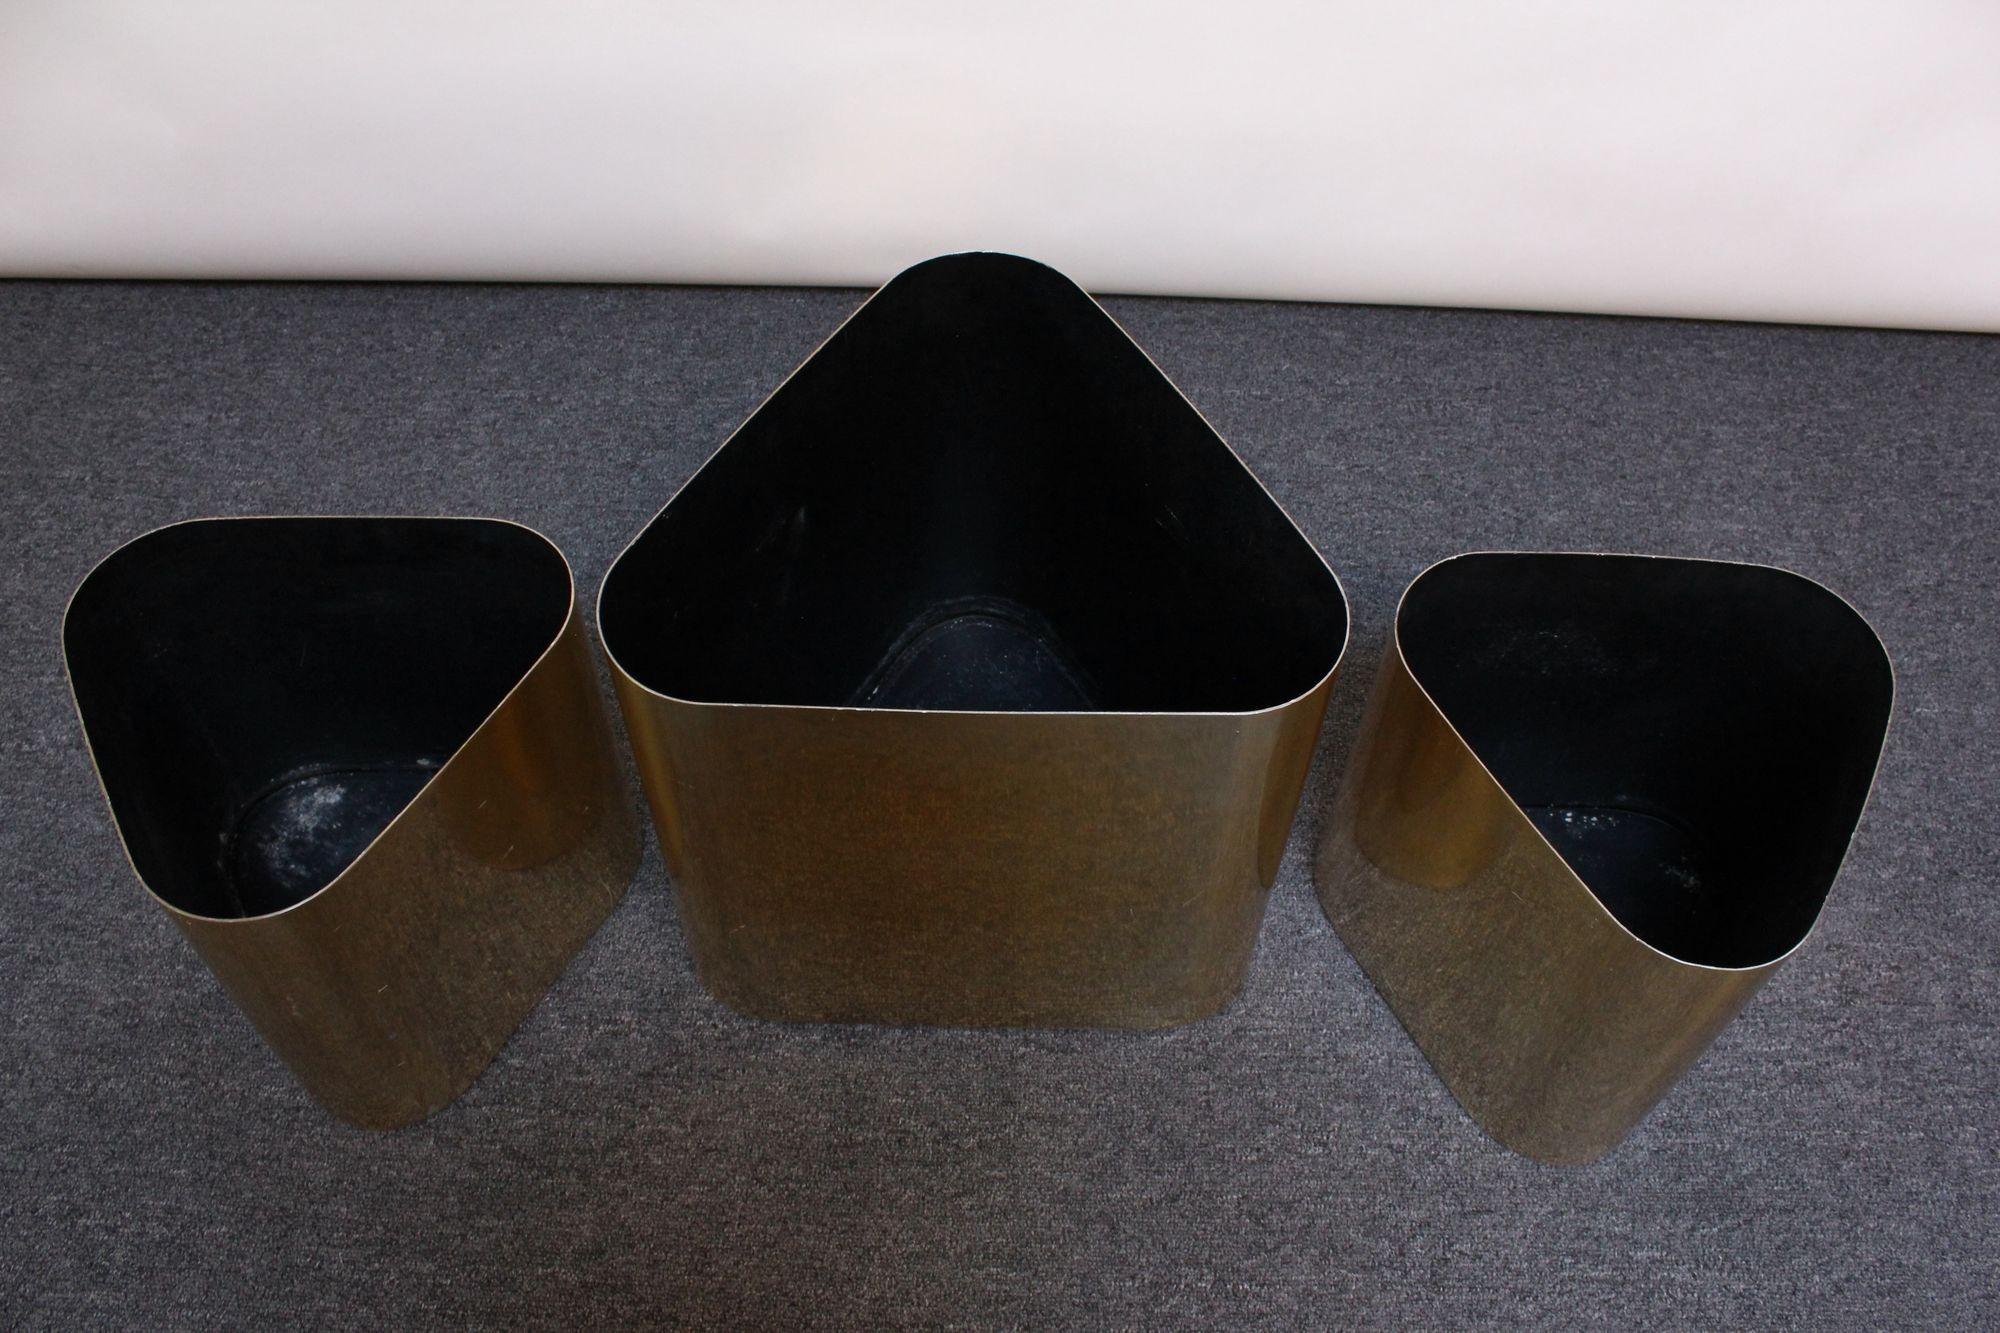 Set of three large planters designed in the 1970s by Paul Mayen for Habitat International.
Uncommon triangular form in aluminum with a brassy/gold finish.
Reflective exterior shows scratches and black interior shows general wear/soiling from use.